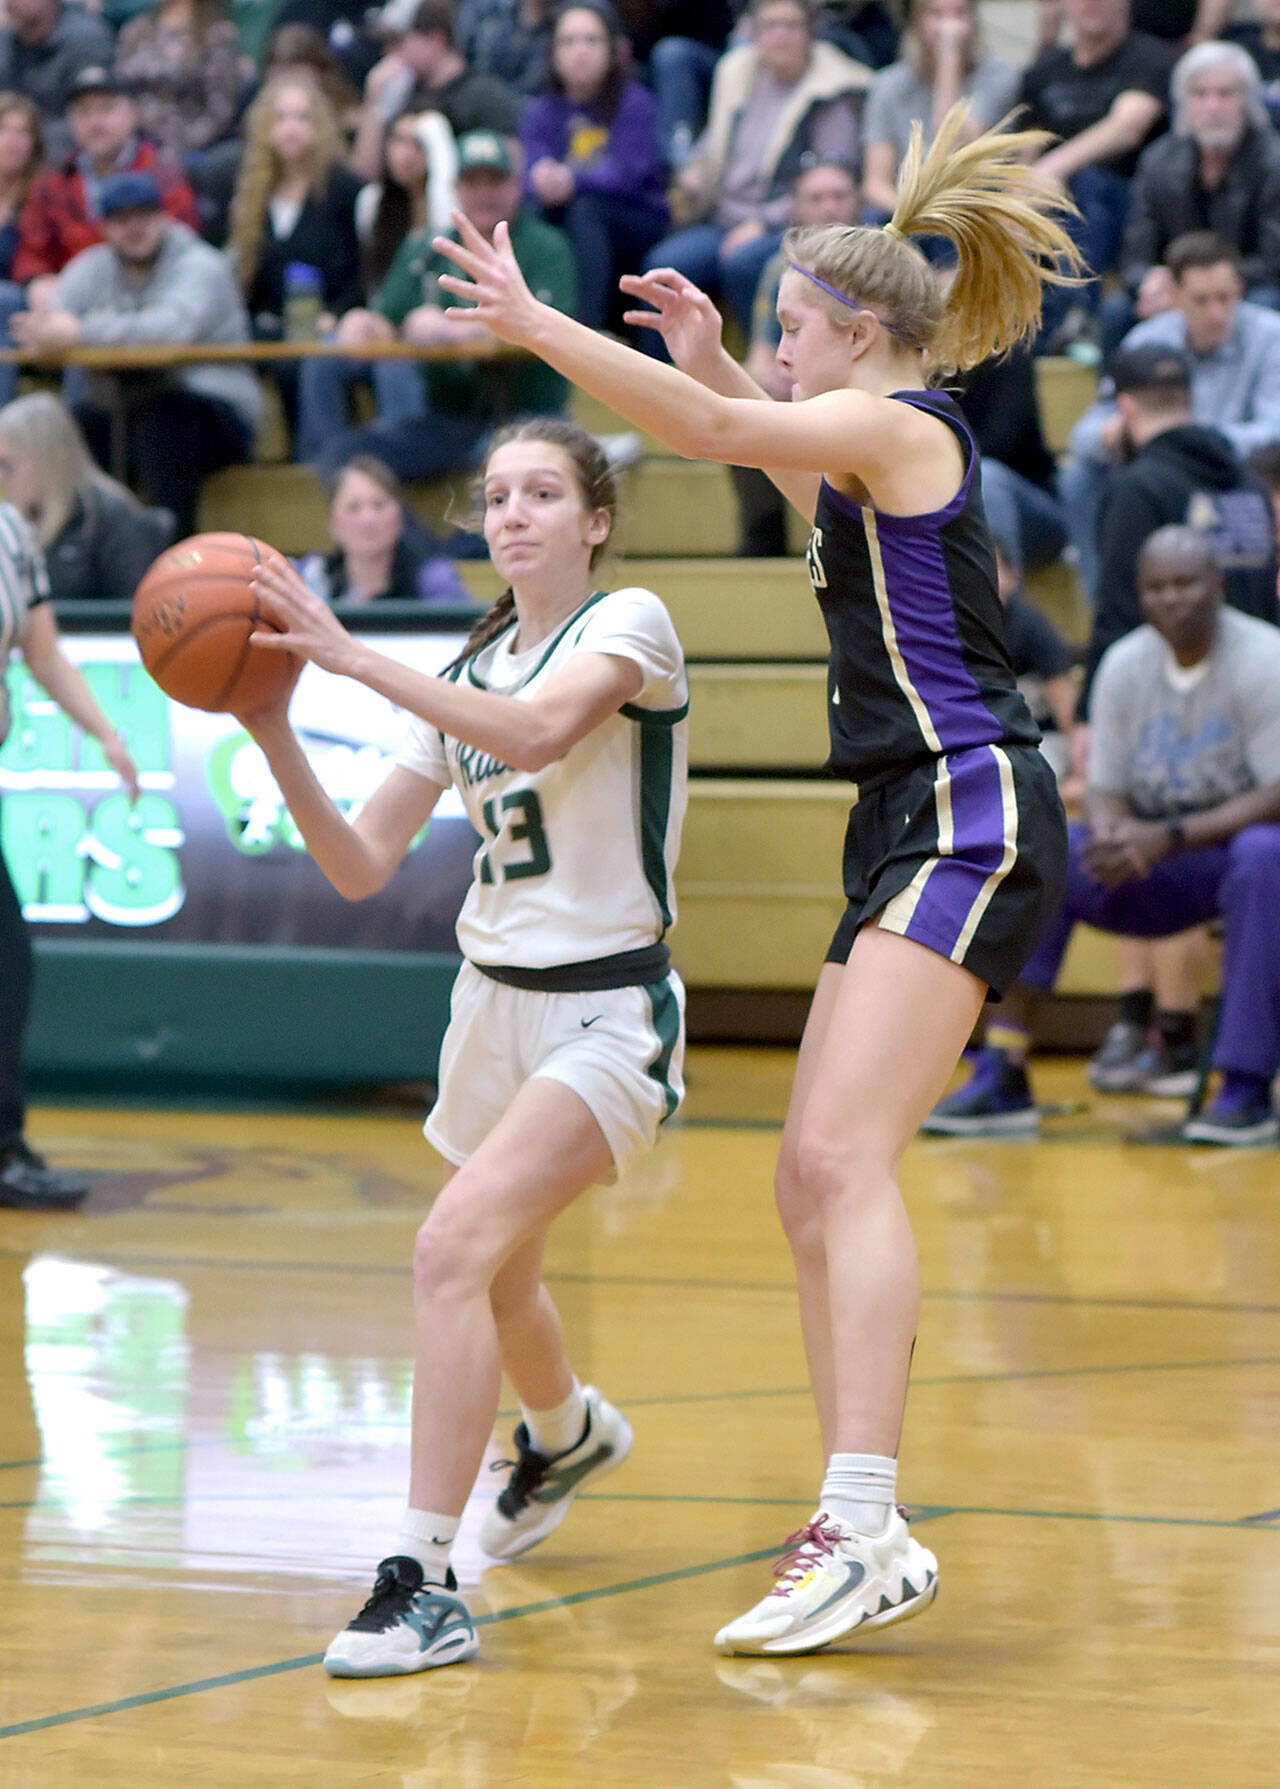 KEITH THORPE/PENINSULA DAILY NEWS Port Angeles’ Morgan Politika, left, looks for her teammates as Sequim’s Jolene Vaara tries to hold her off during Tuesday’s game at Port Angeles High School.